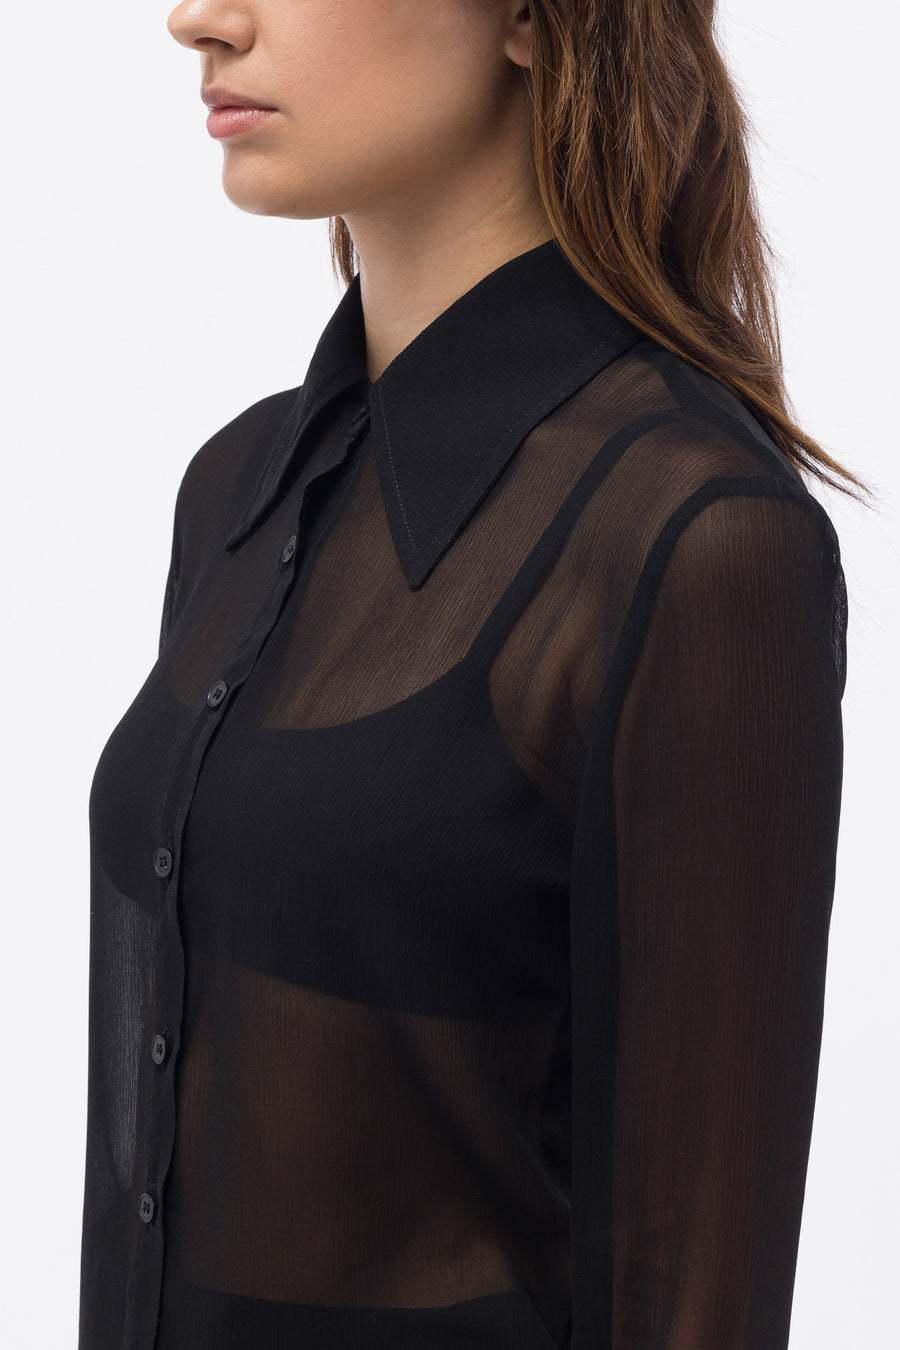 Tanner Fletcher - Sheer Shirt with Feather Trim in Black - Notre